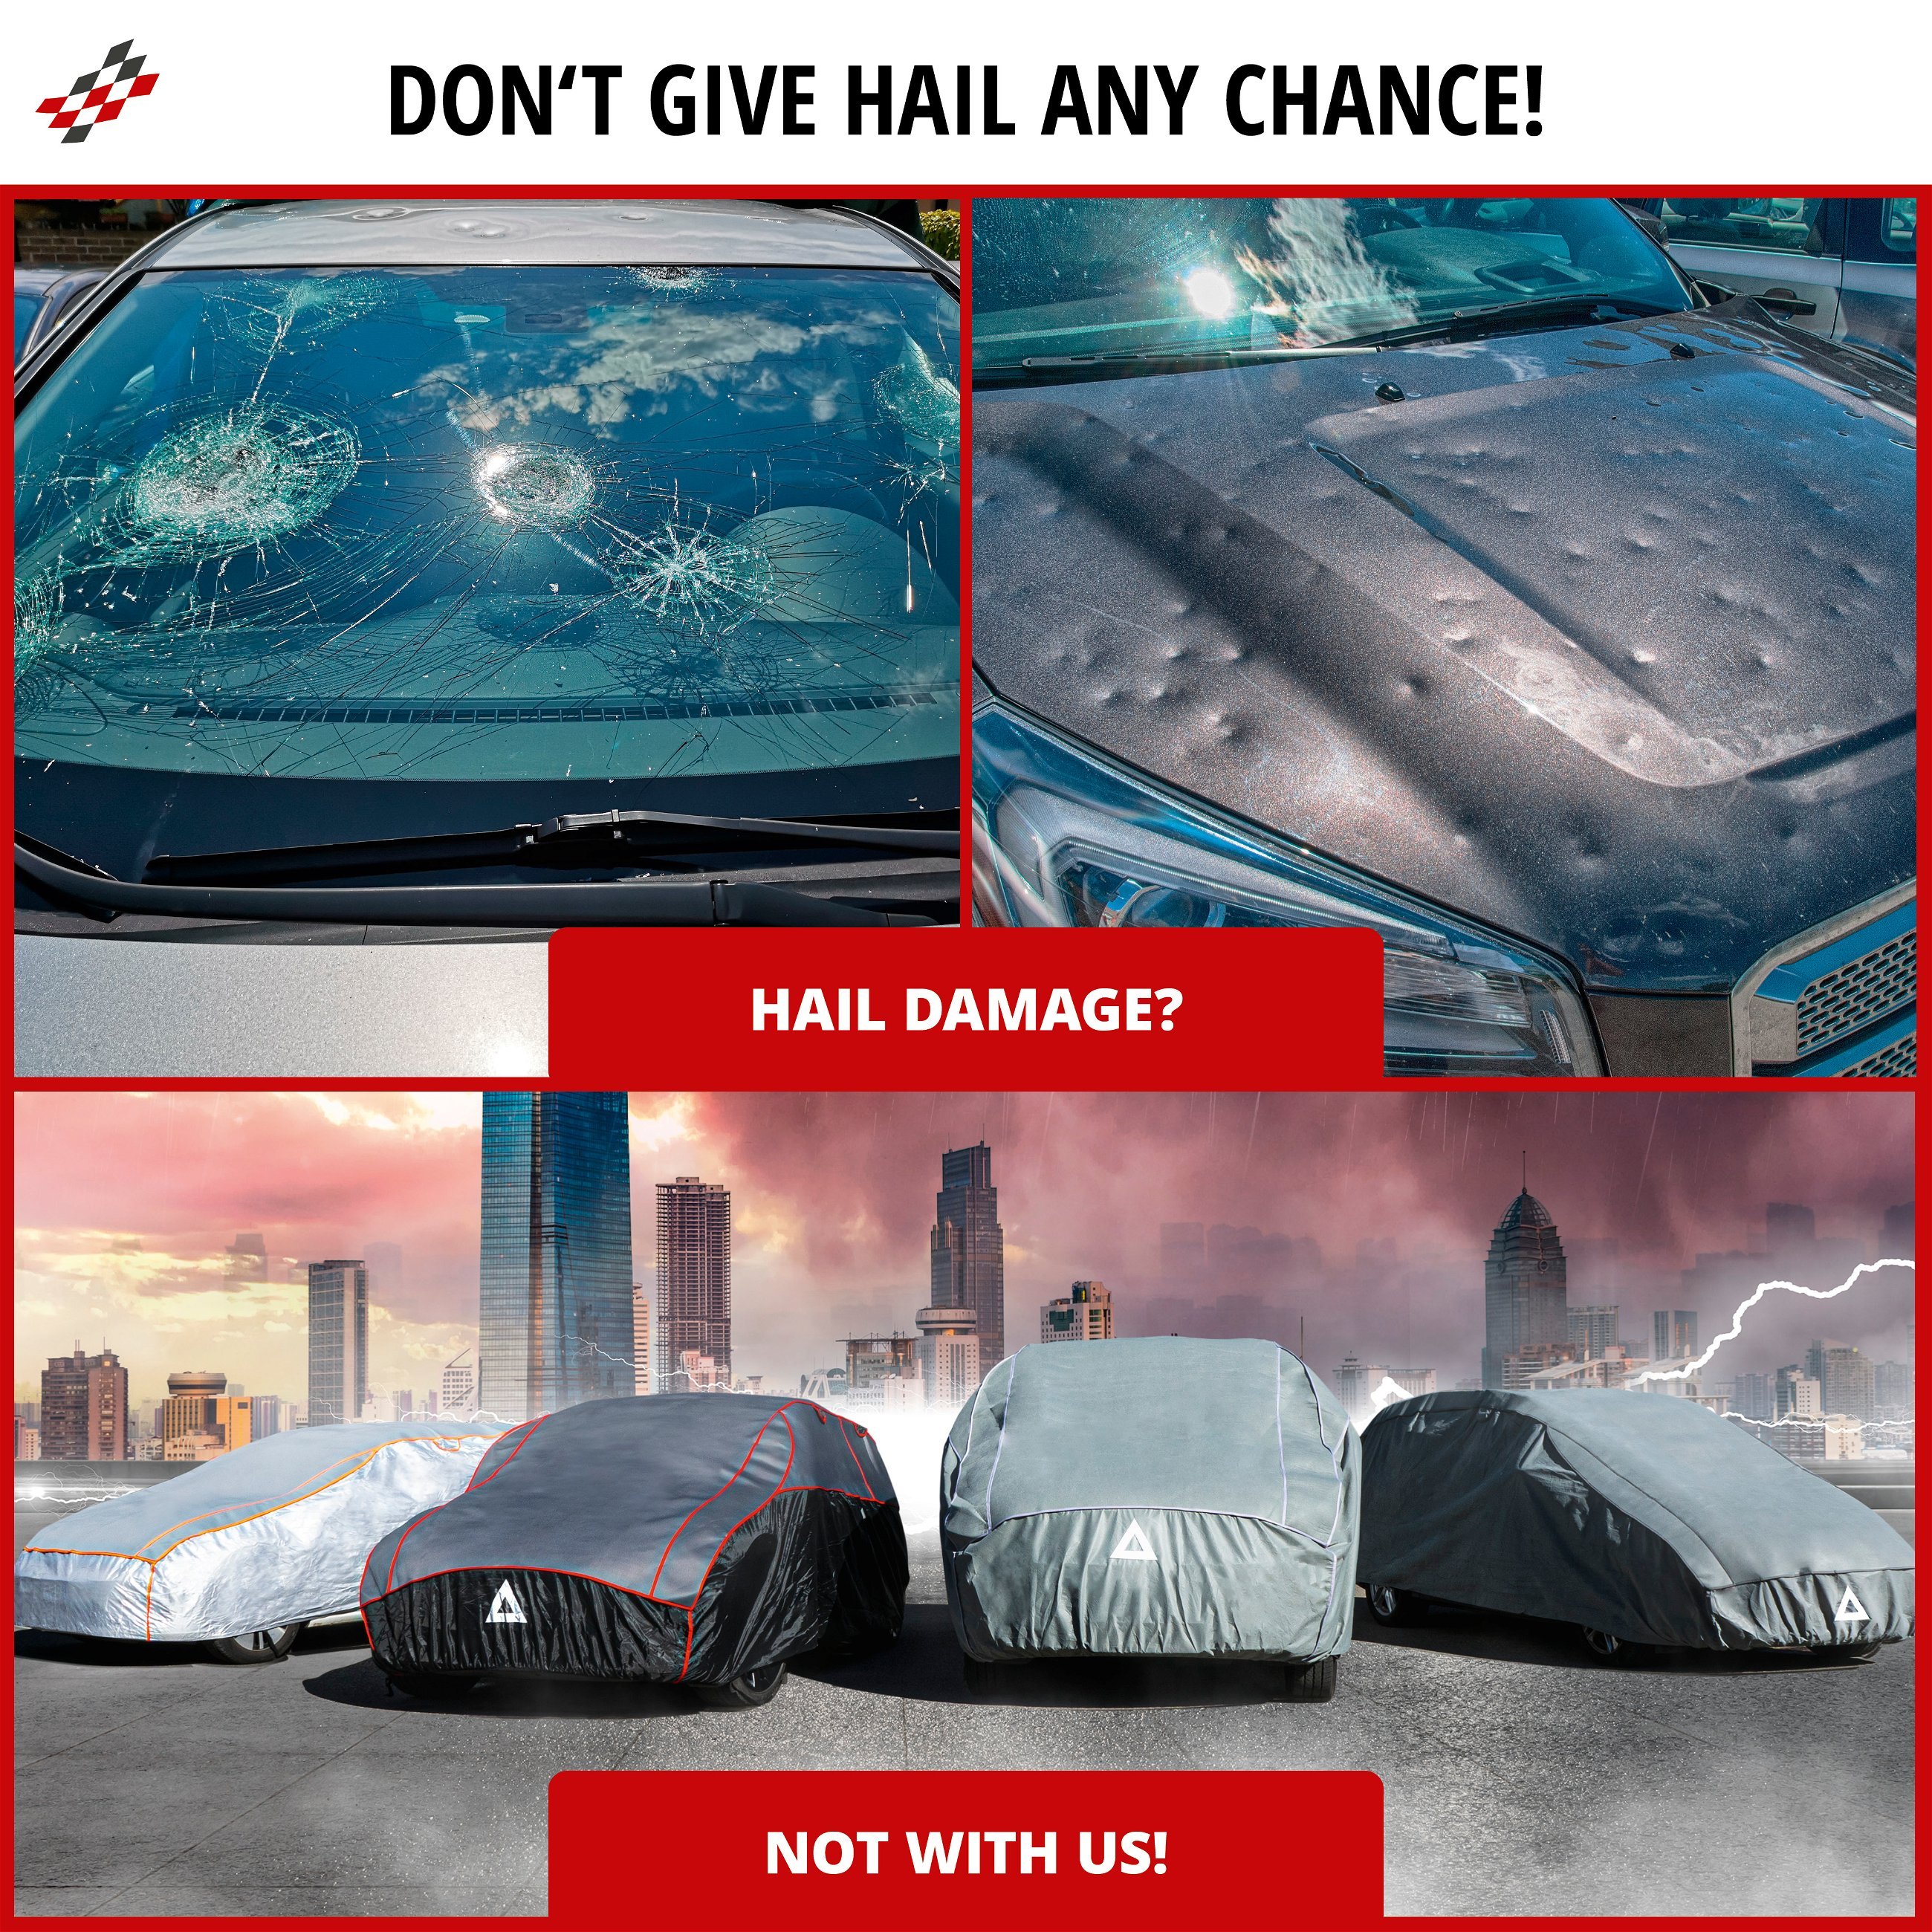 Car hail protection cover Hybrid UV Protect SUV size L